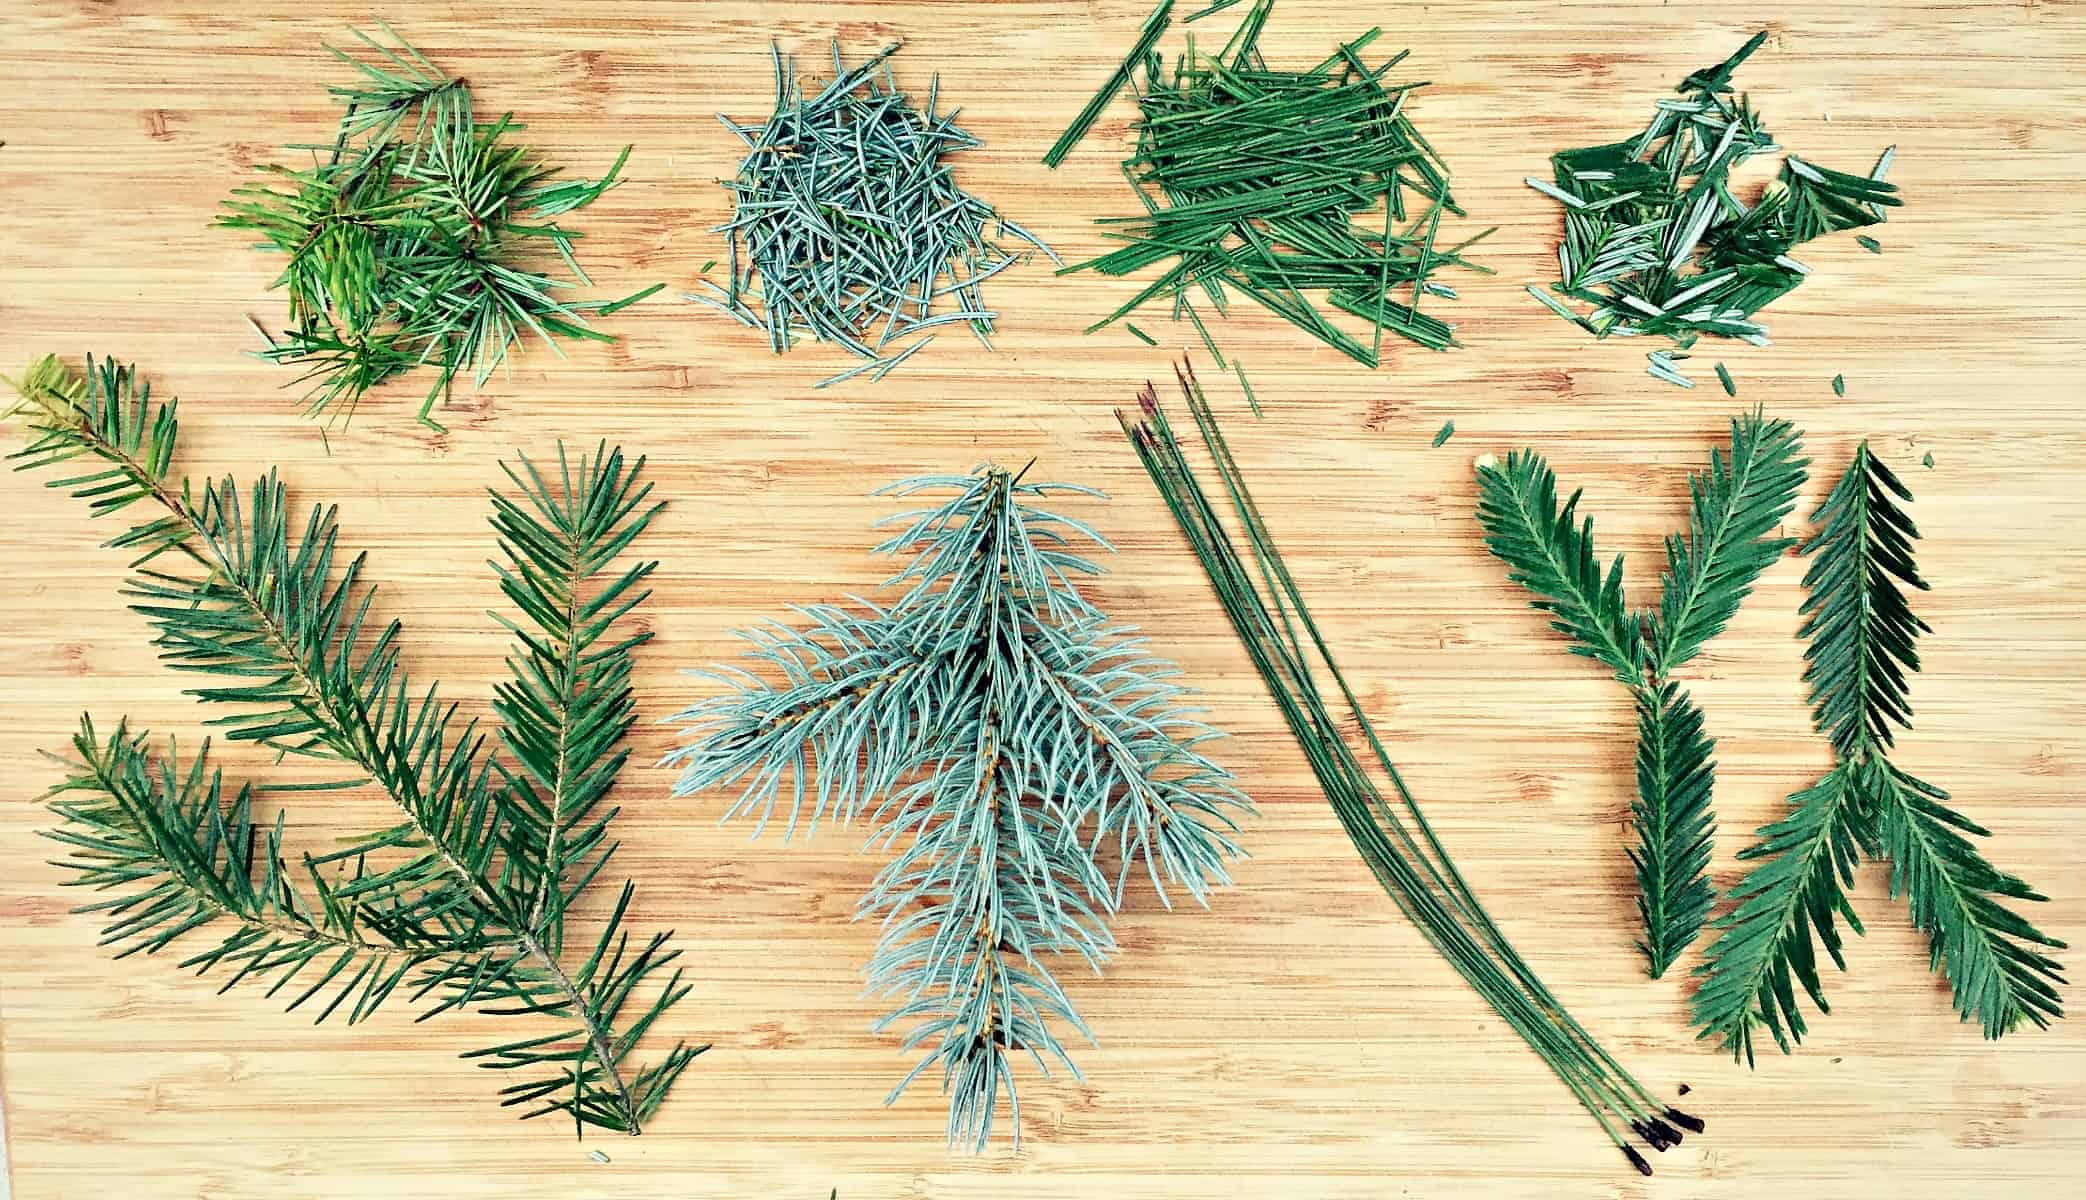 Foraging for Pine Needles and other conifer needles